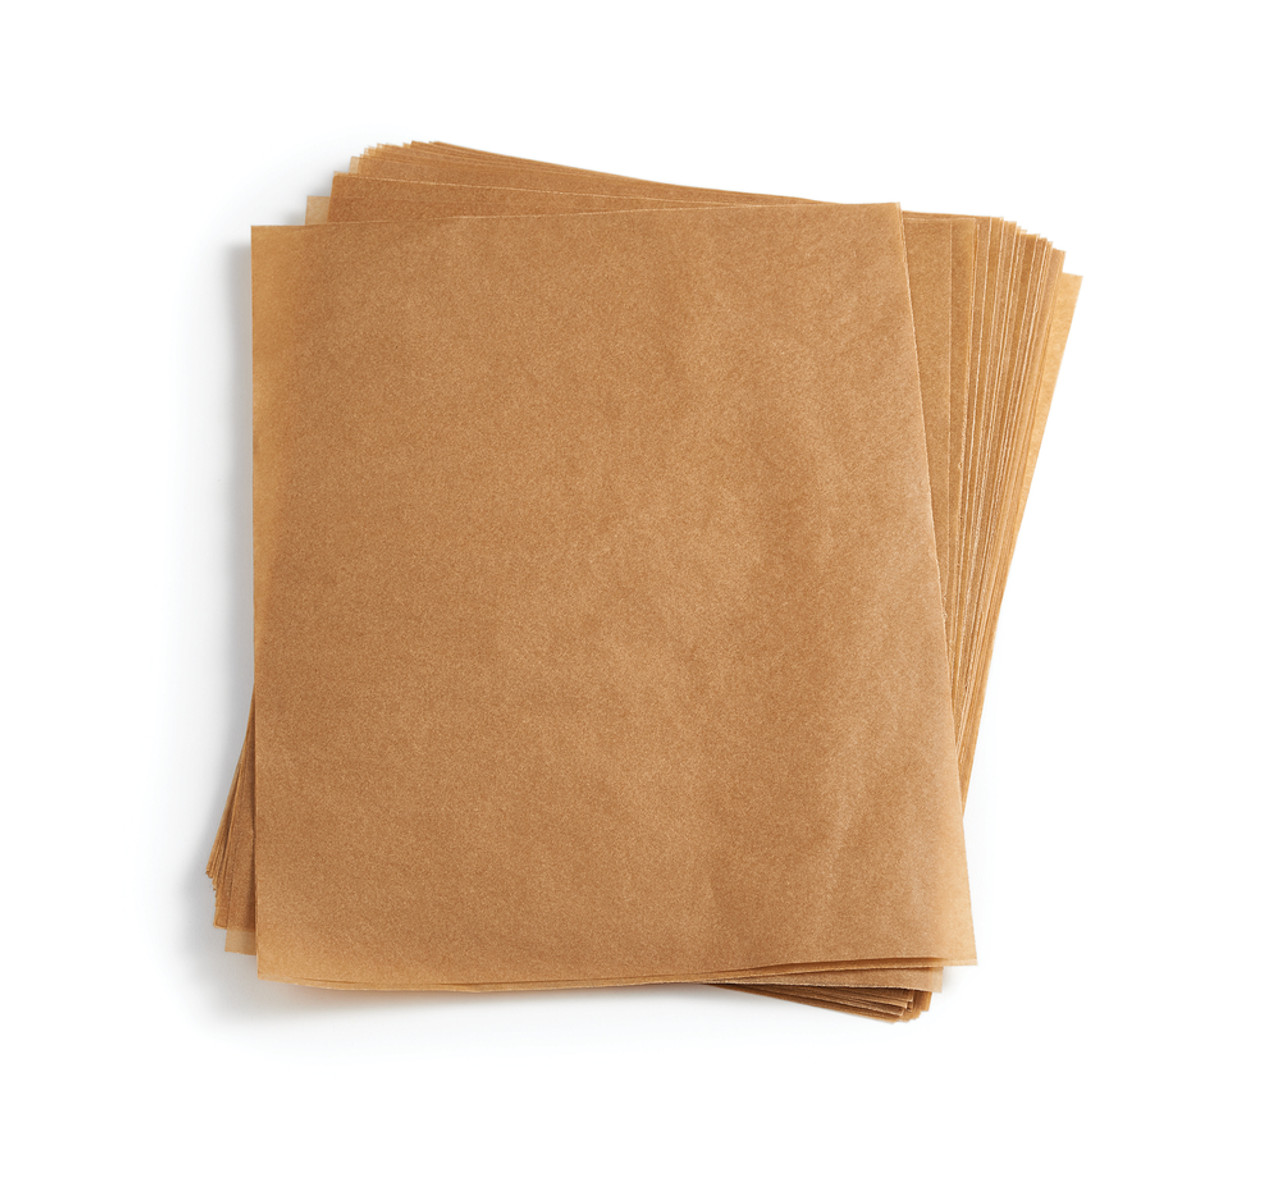 Quality Parchment Paper, Variety of Uses, Perfect Choice - PaperPapers Blog